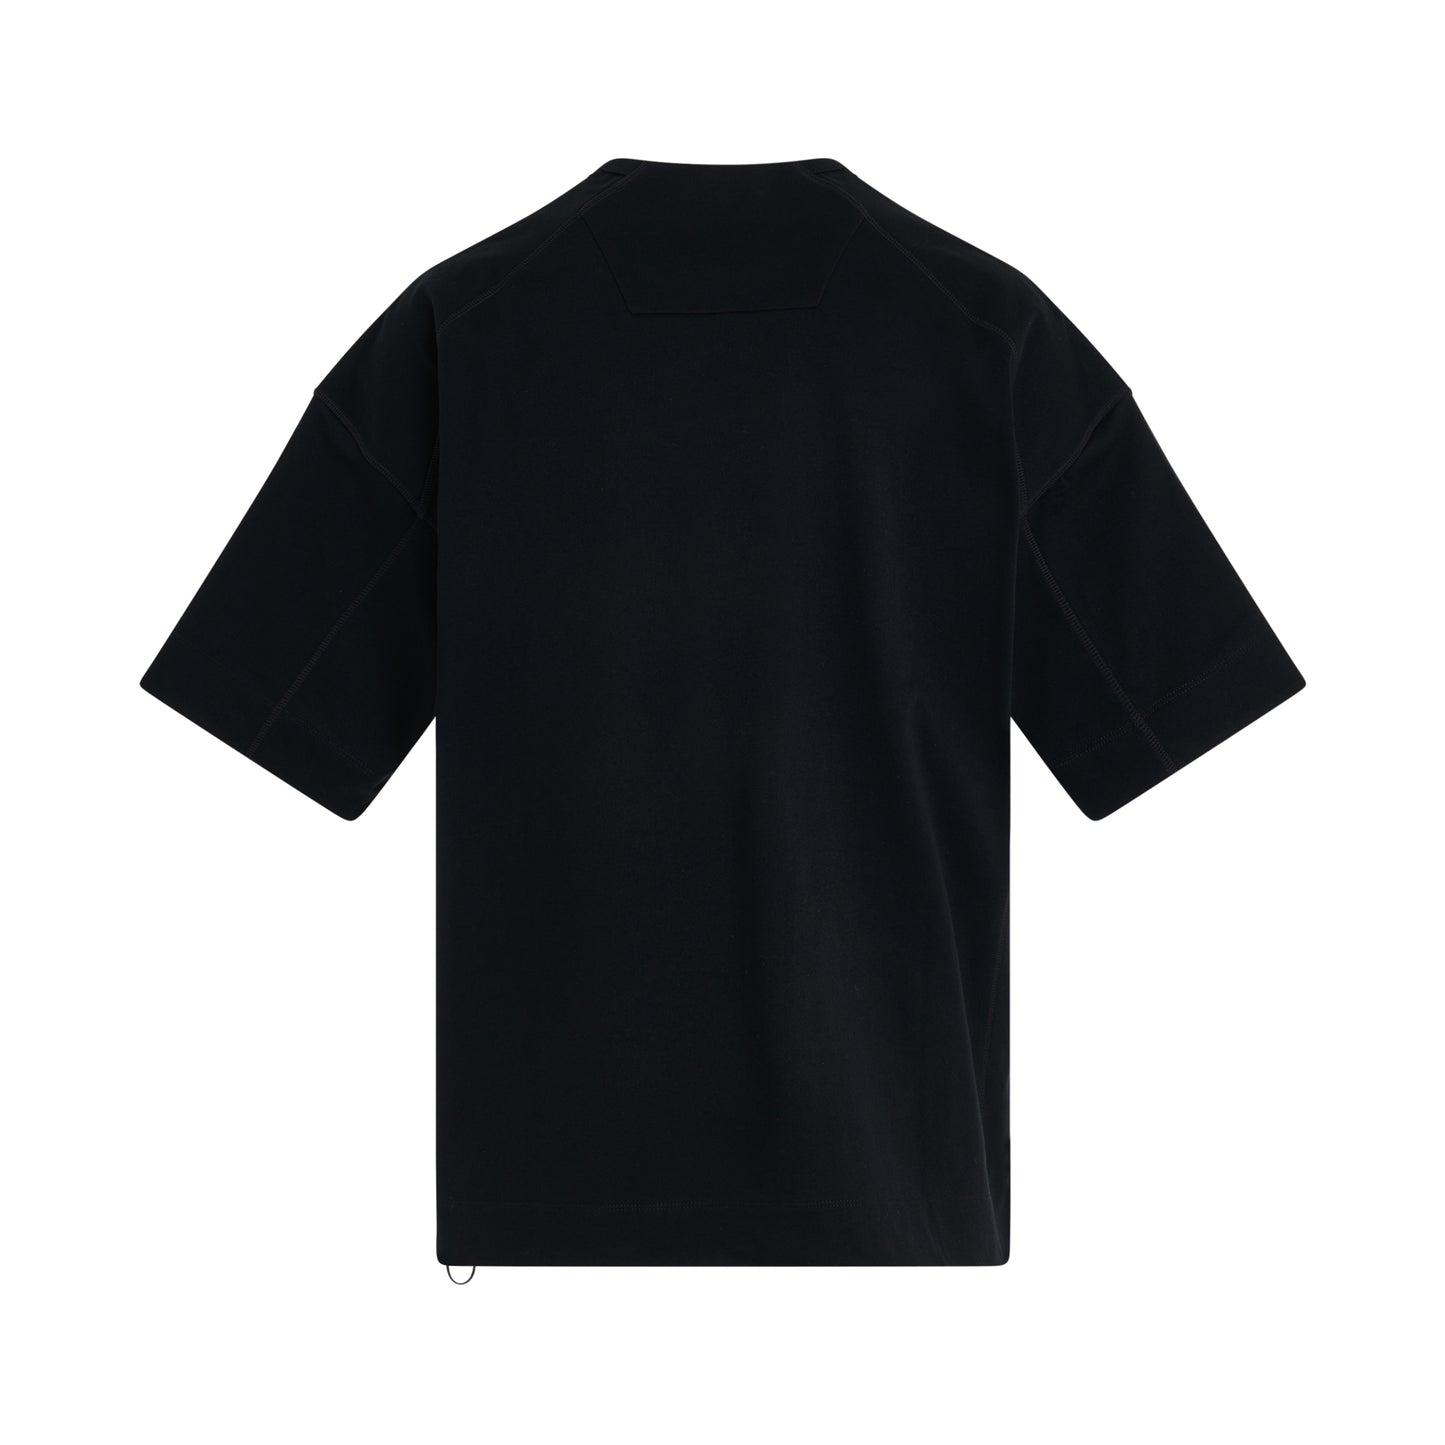 Sleeve Zip Over Fit T-Shirt in Black